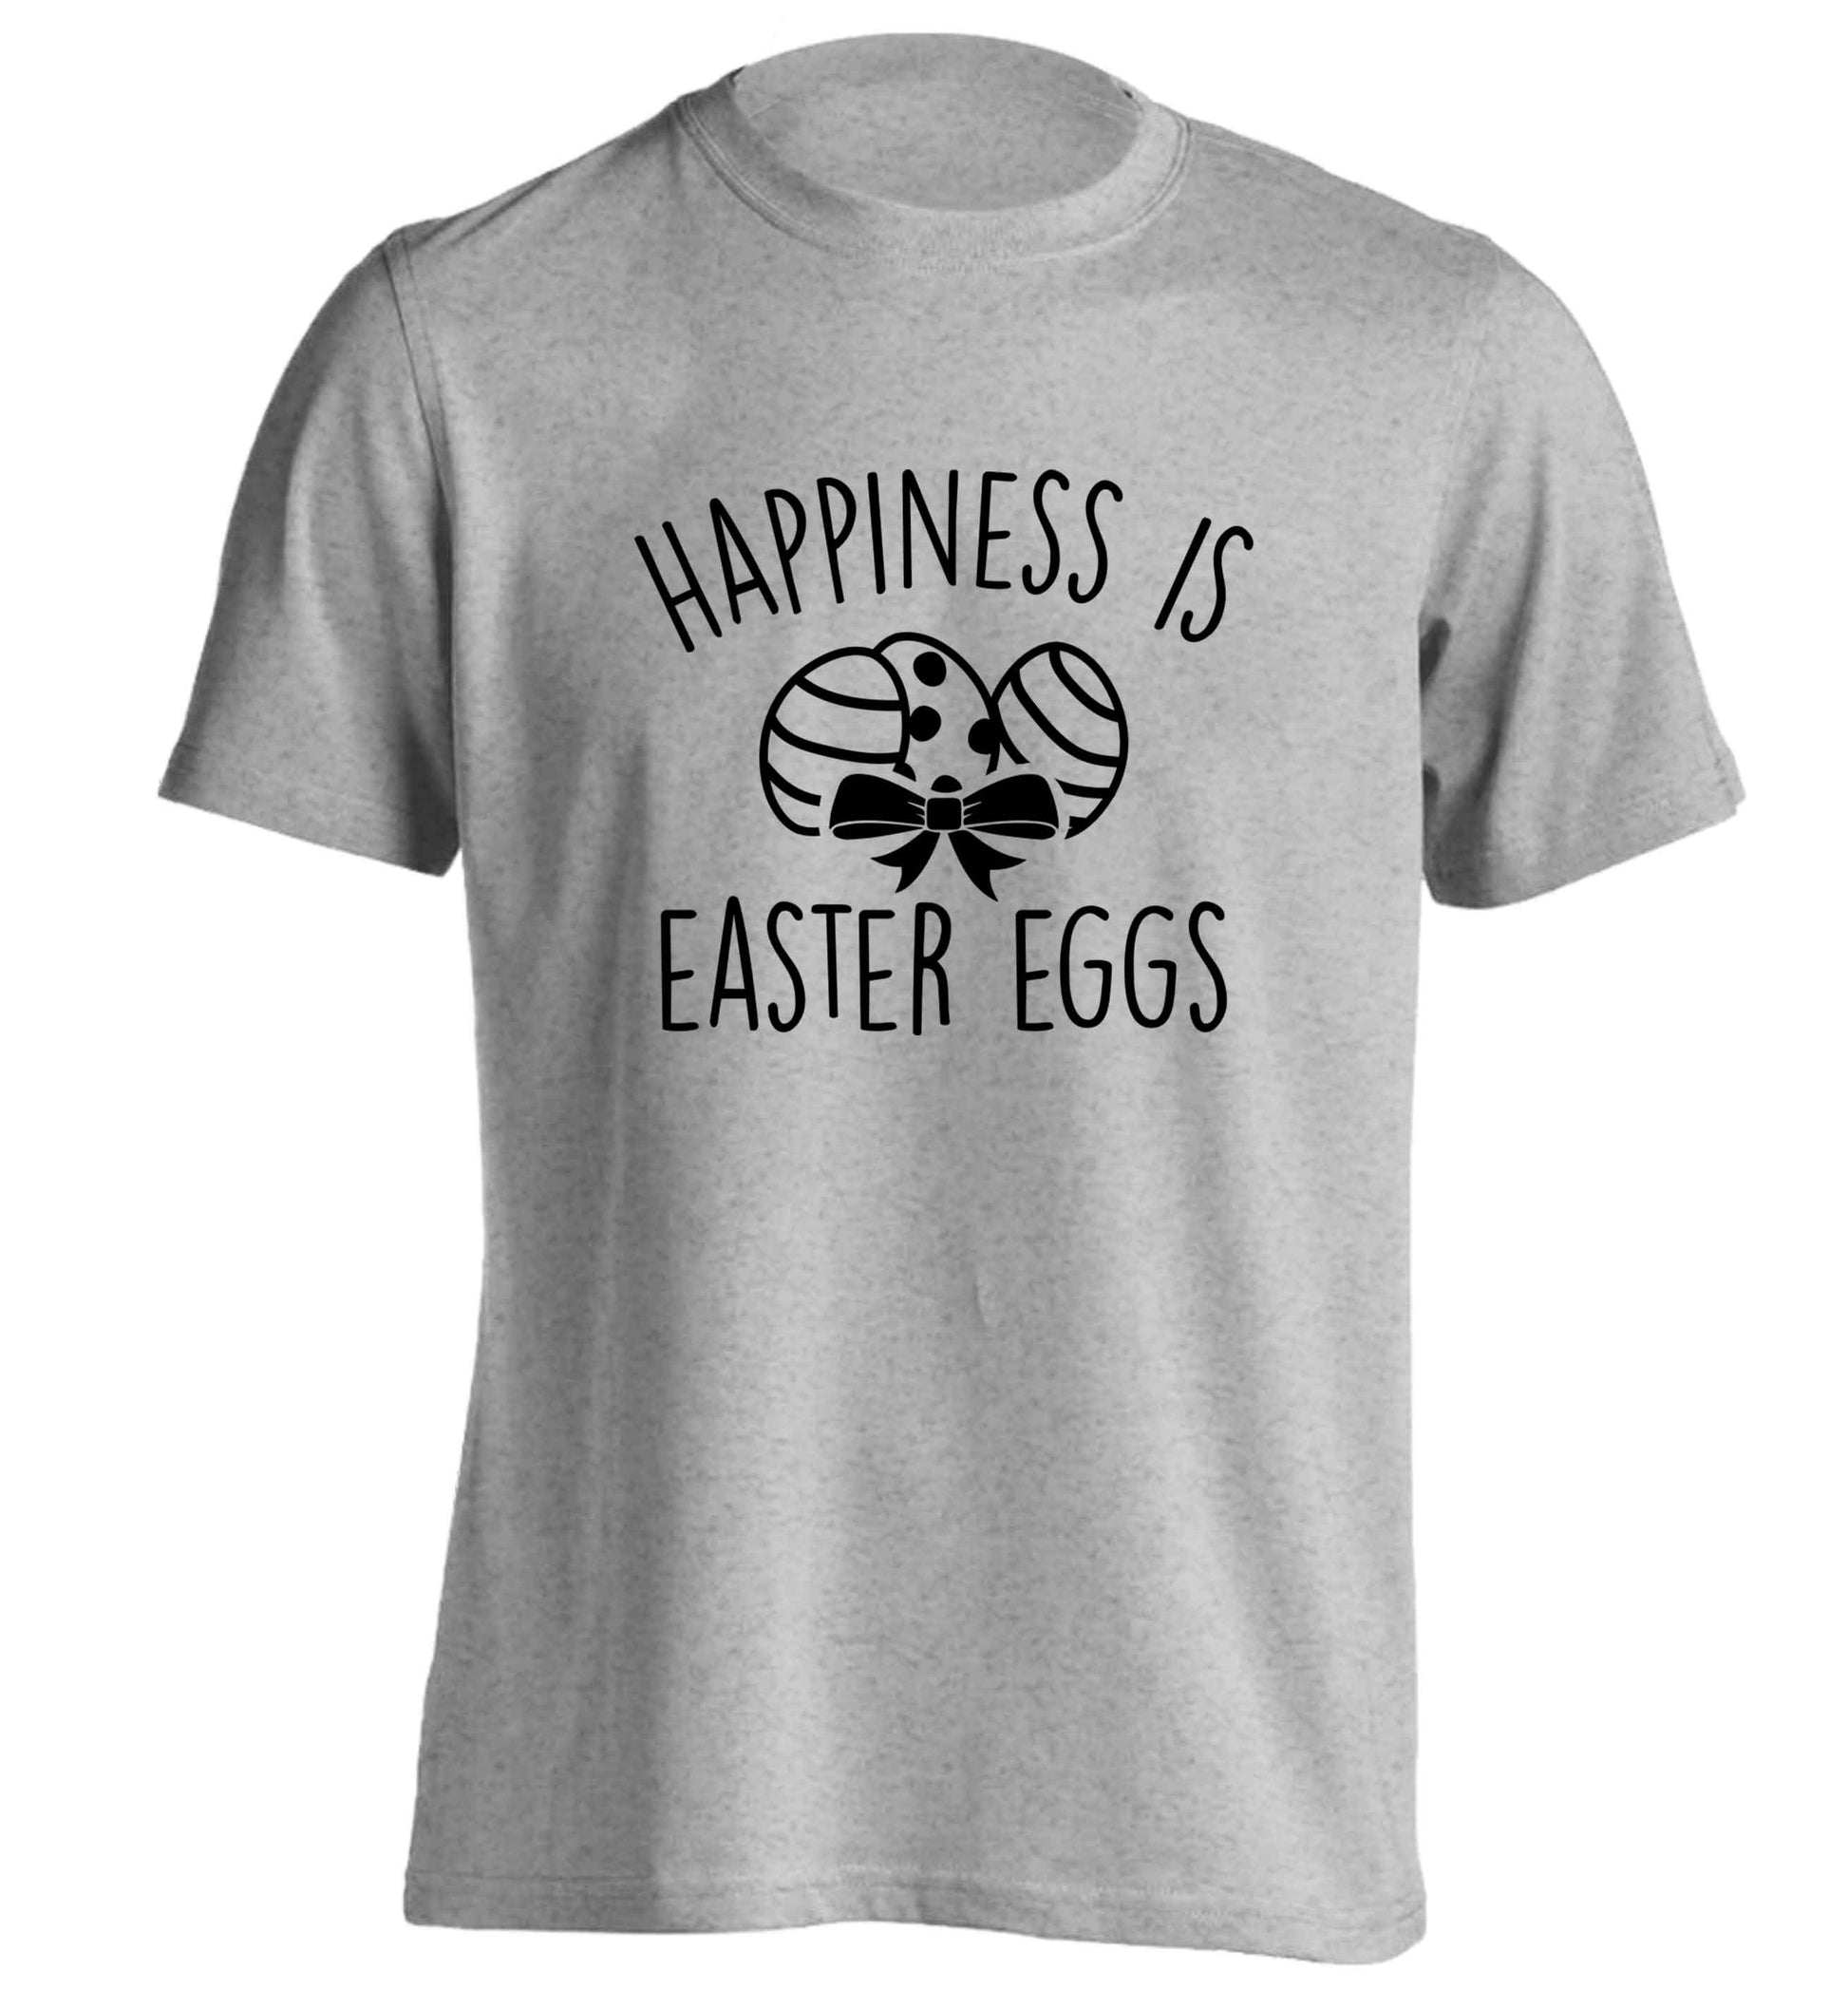 Happiness is Easter eggs adults unisex grey Tshirt 2XL